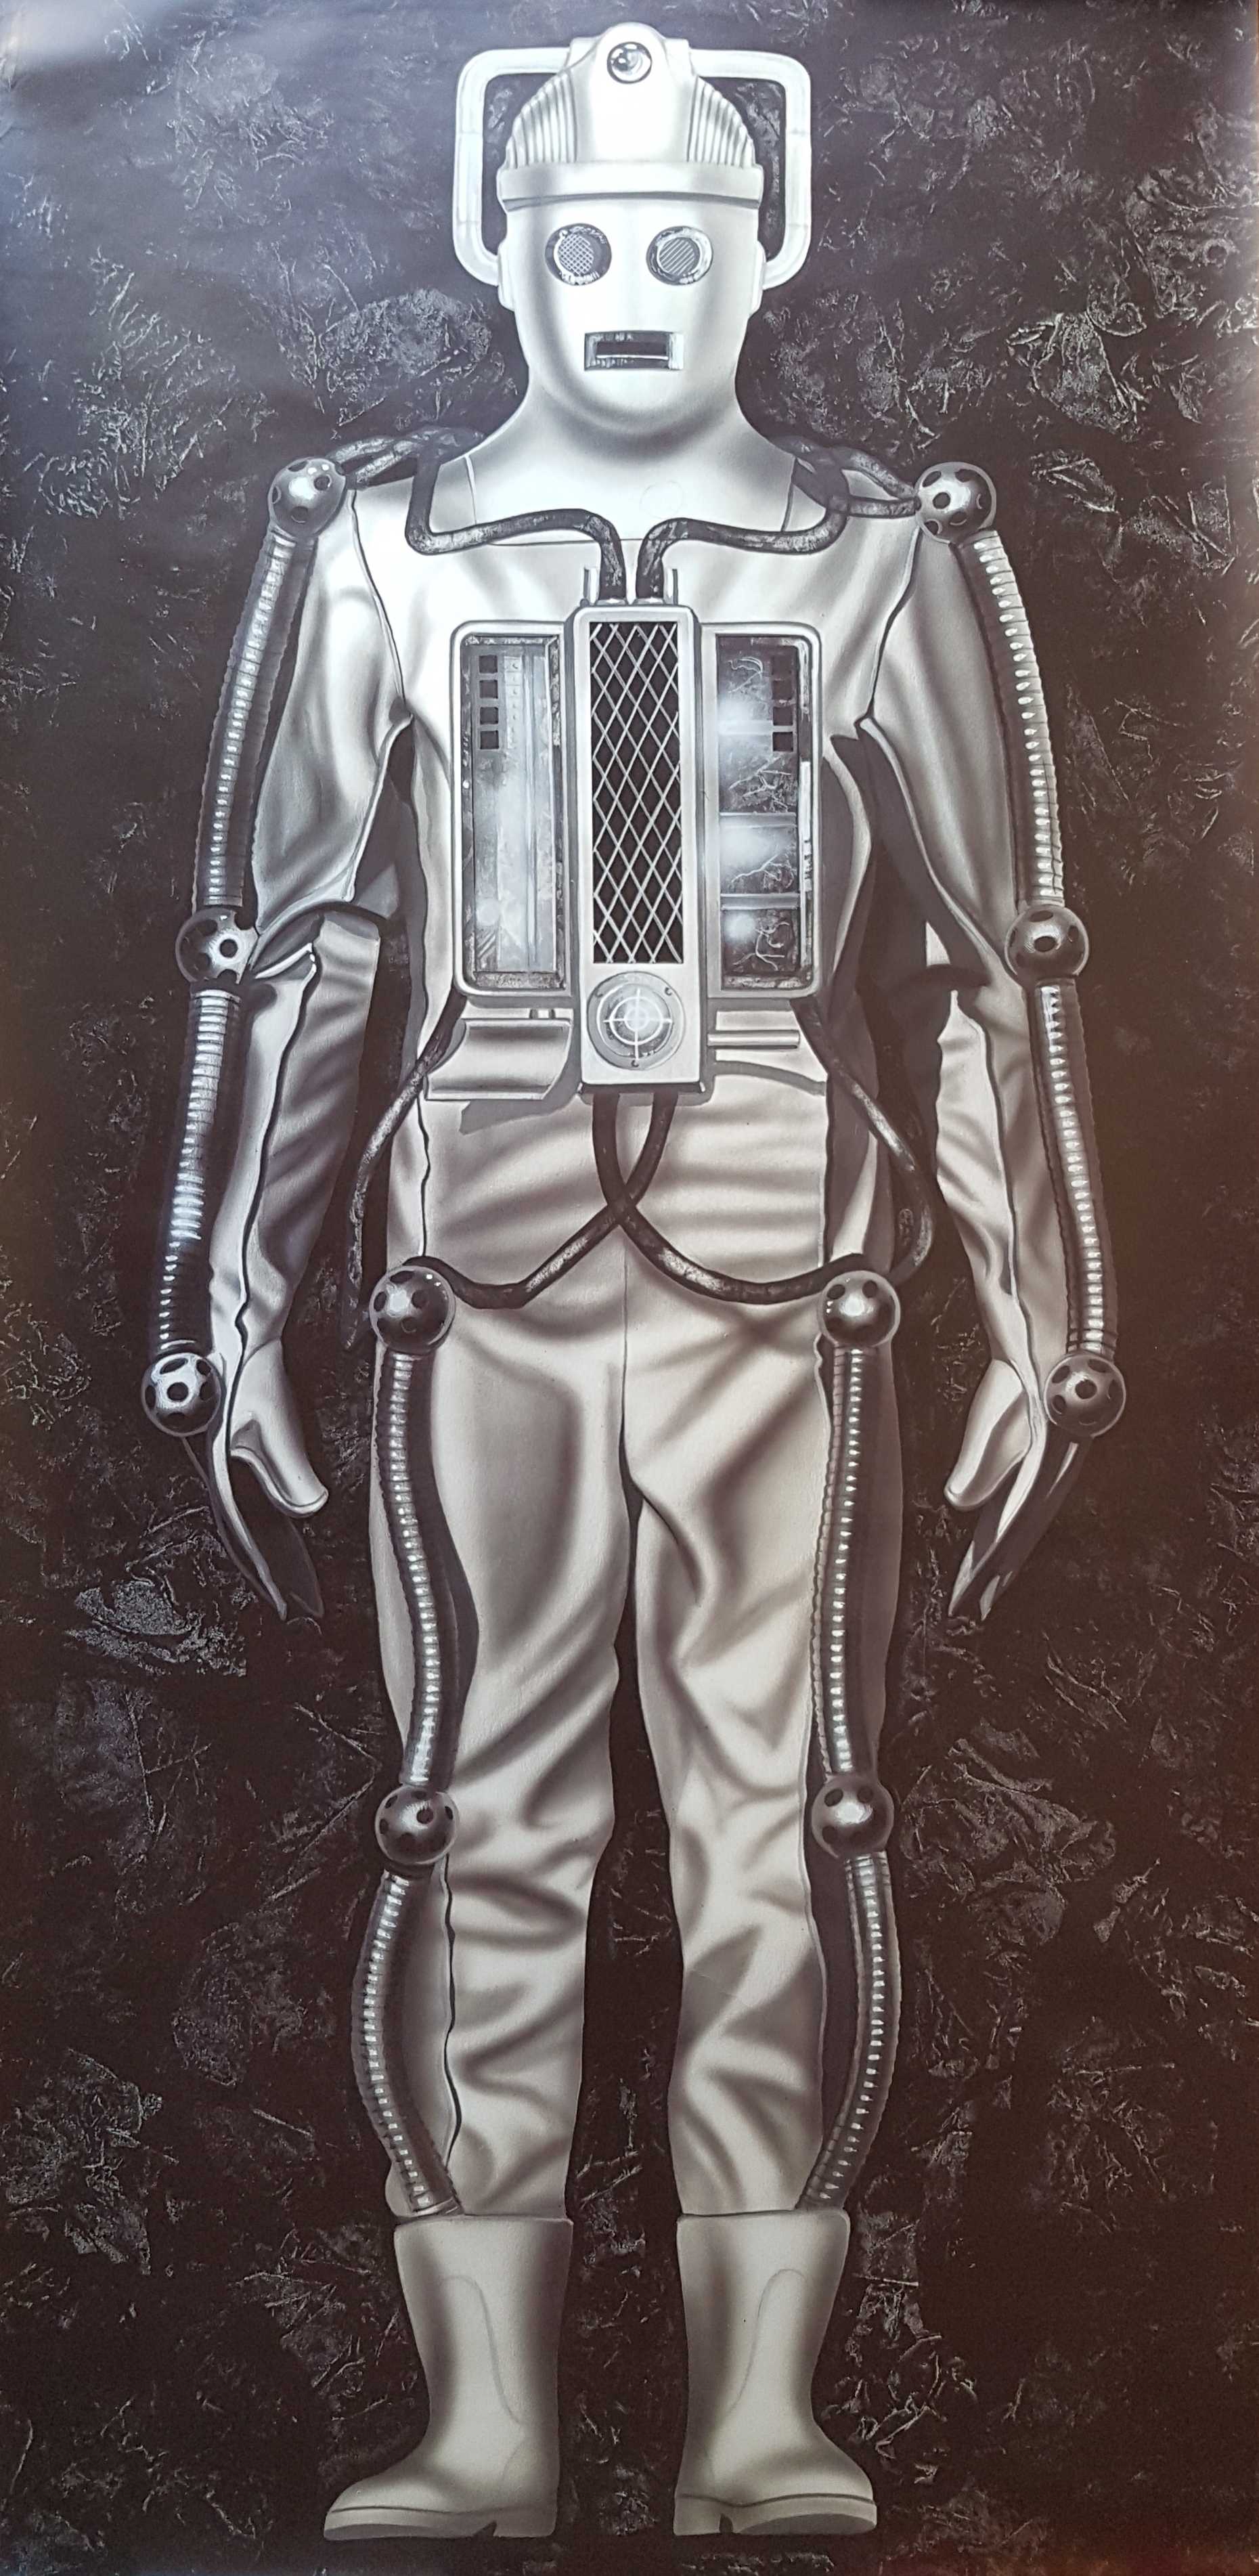 Picture of Poster-DW-Cyber2 Doctor Who - Cyberman by artist Unknown from the BBC posters - Records and Tapes library